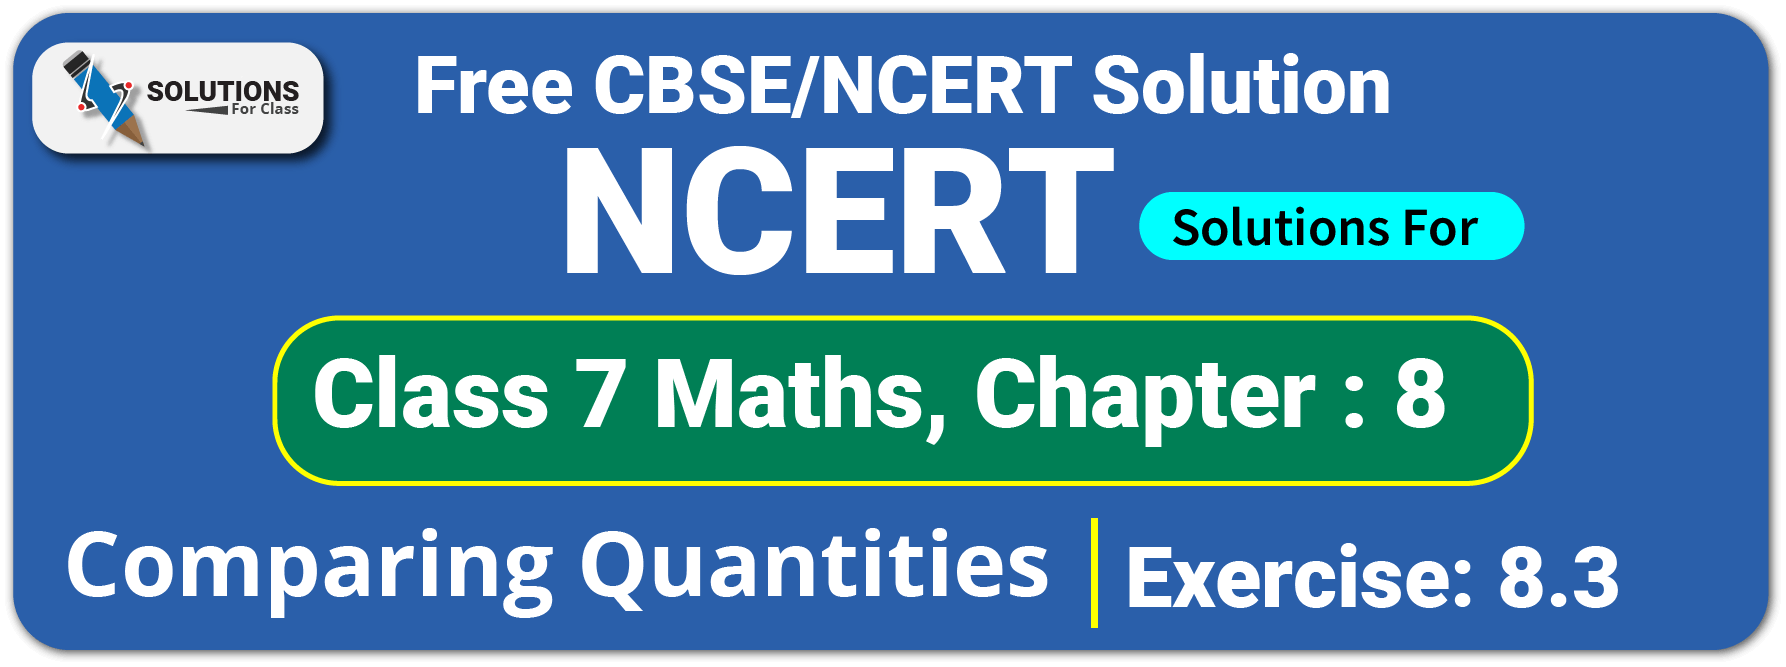 NCERT Solutions For Class 7 Maths Chapter 8, Comparing Quantities, Exercise 8.3